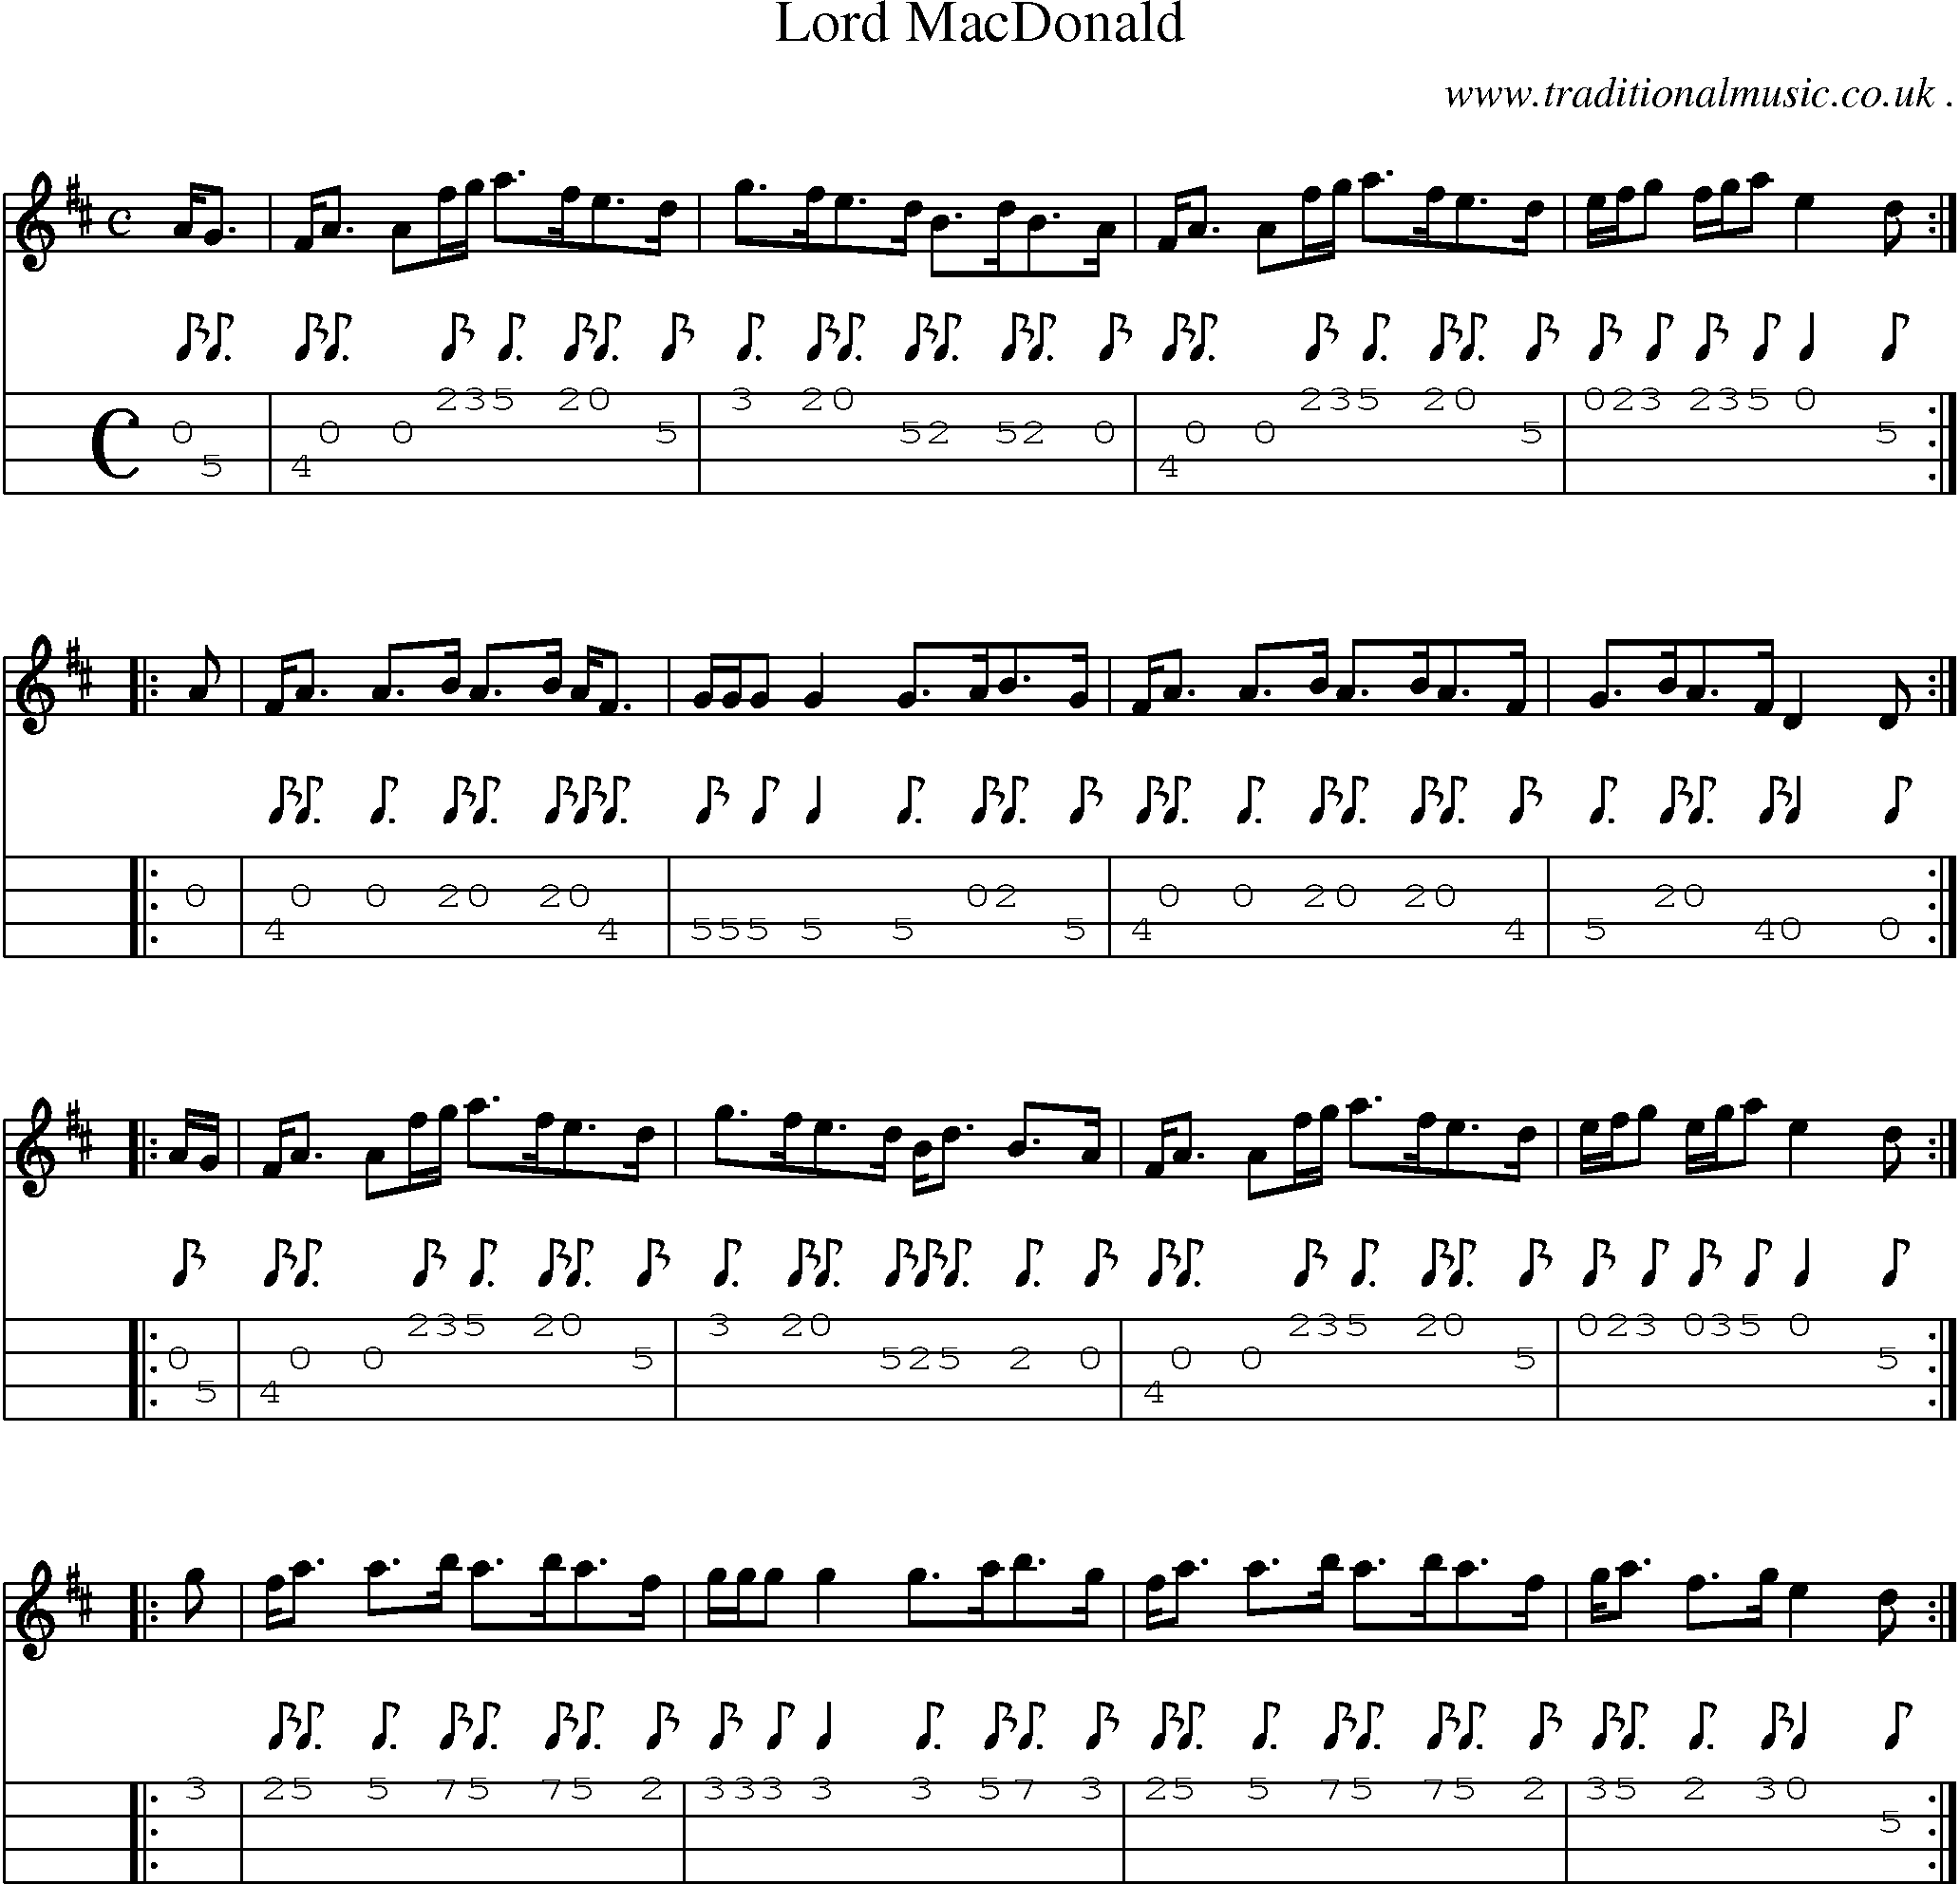 Sheet-music  score, Chords and Mandolin Tabs for Lord Macdonald